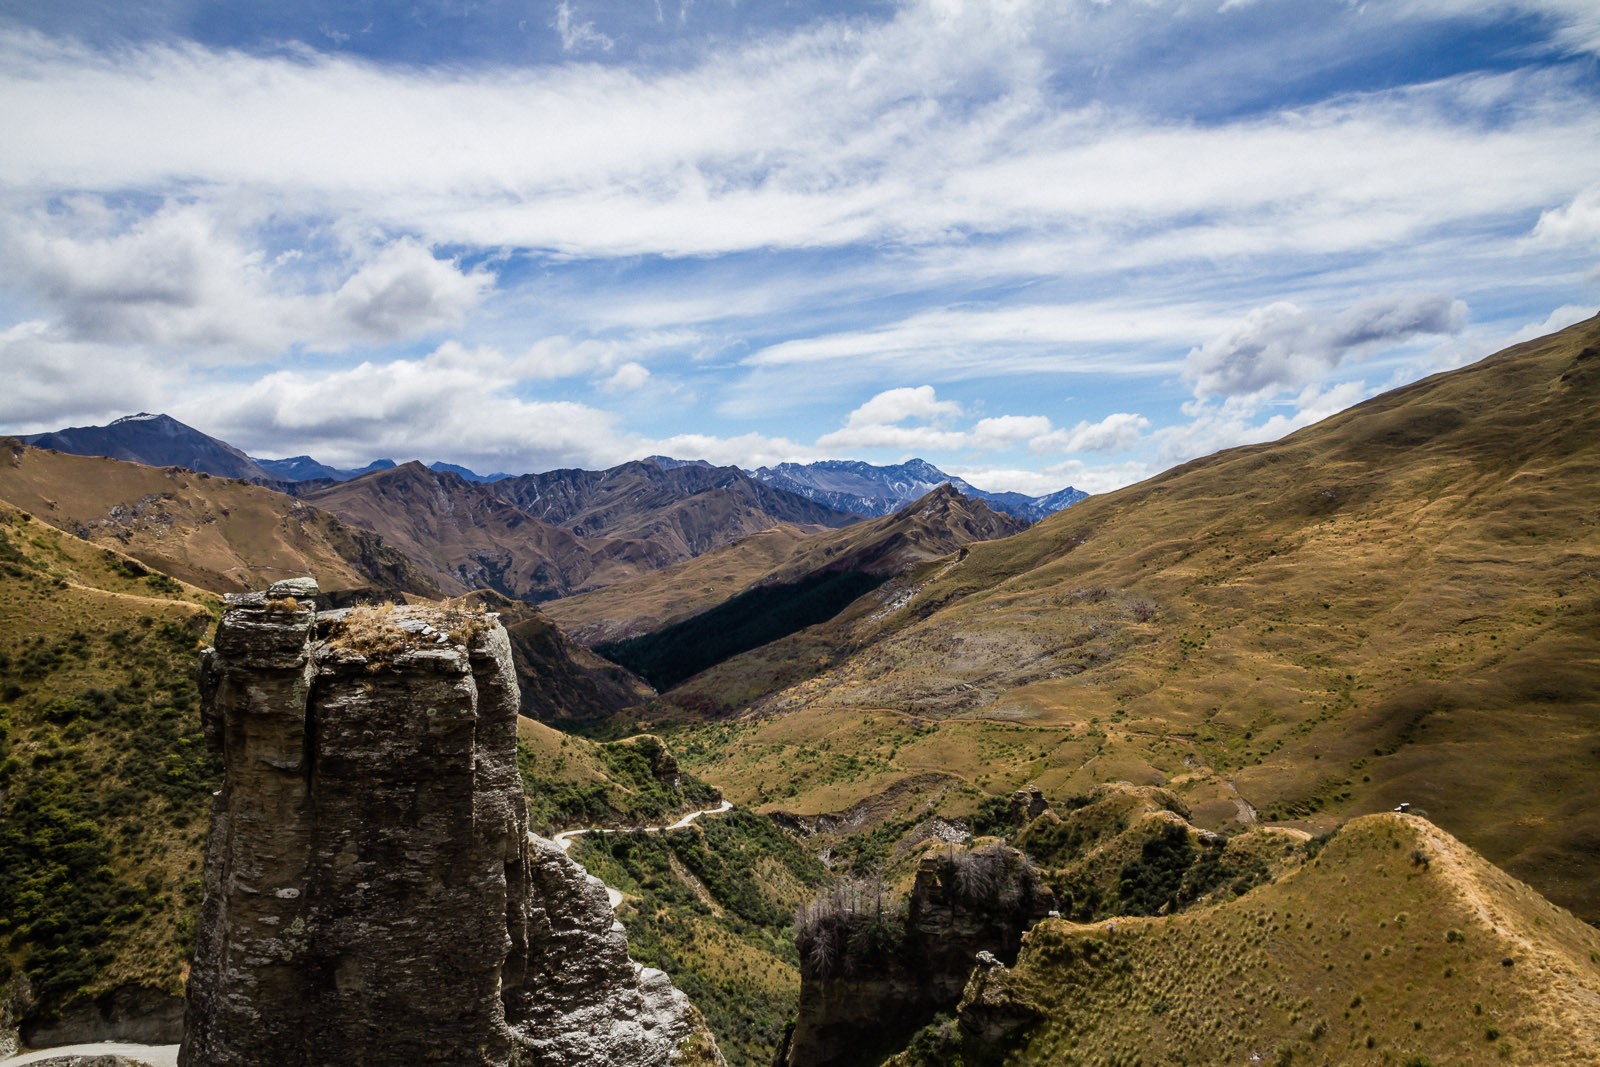 , Skippers Canyon, Queenstown